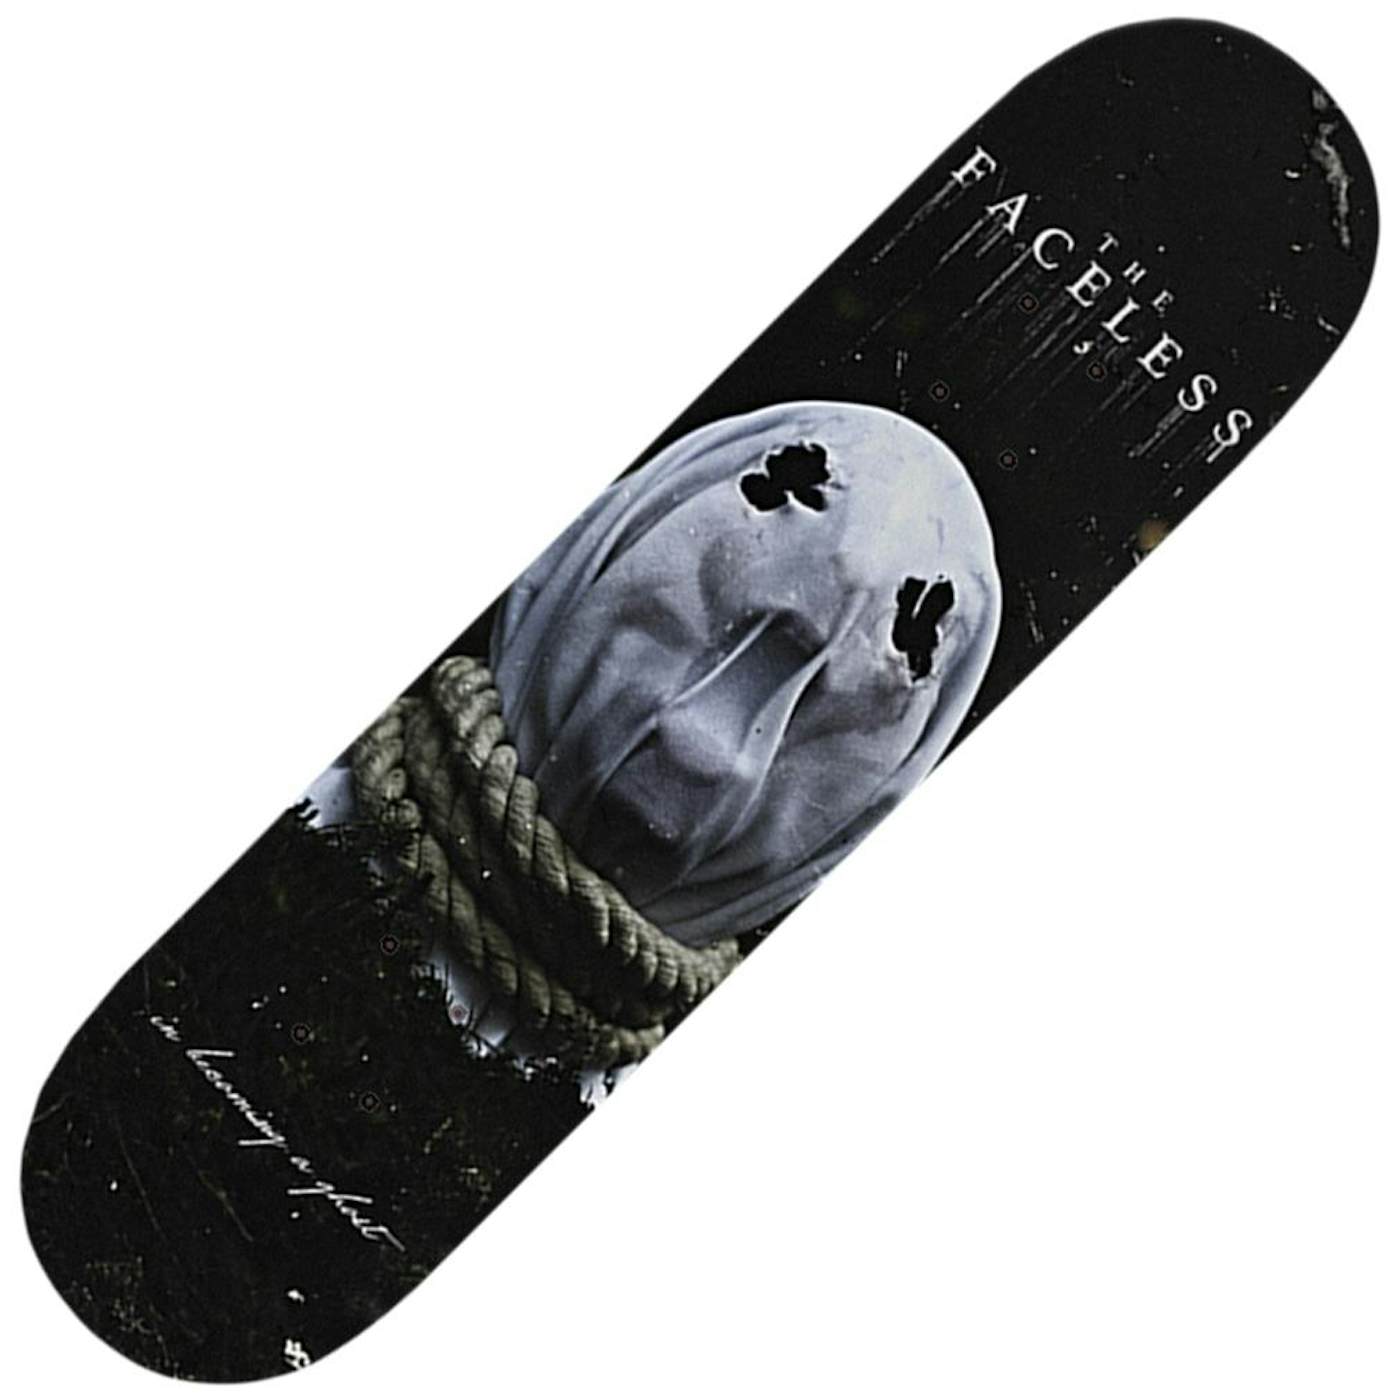 The Faceless - In Becoming A Ghost Skatedeck